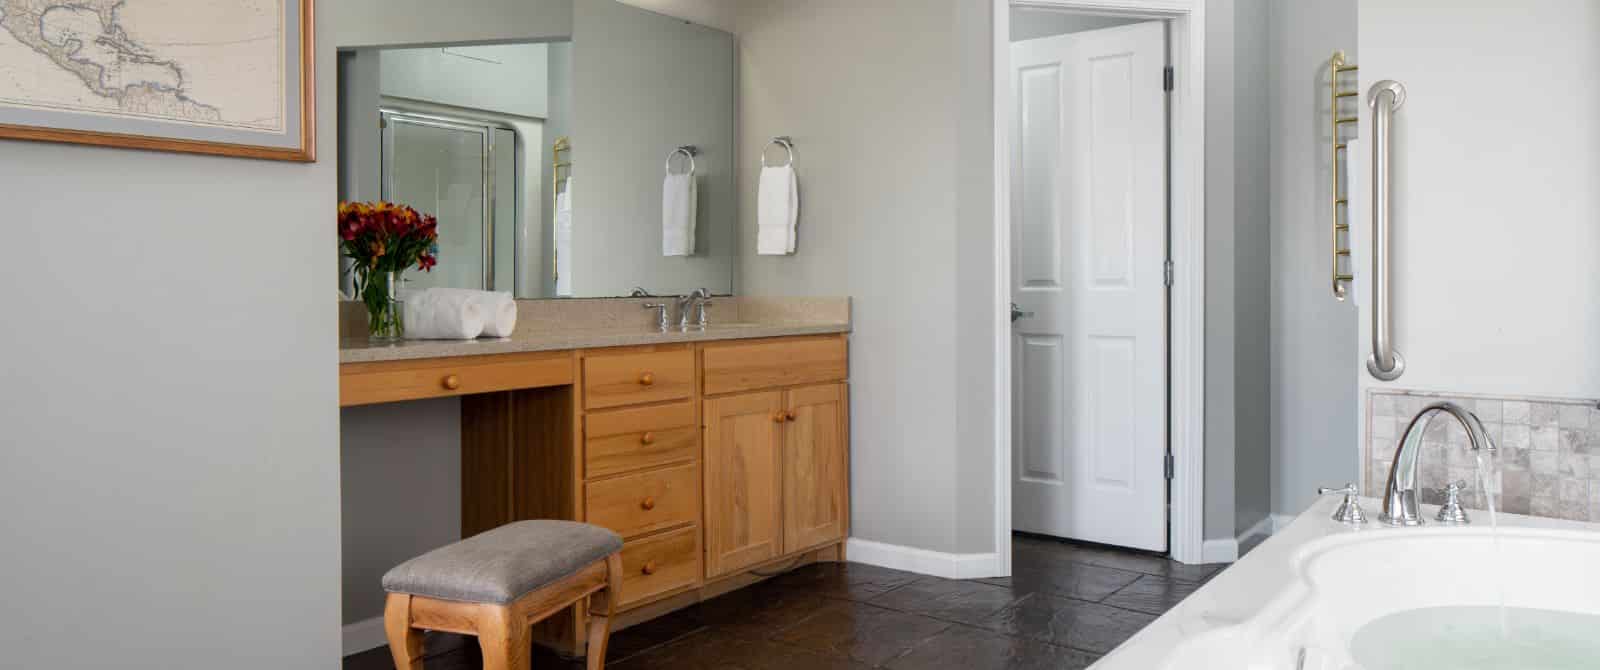 Large bathroom with light gray walls, tiled flooring, wooden vanity with quartz top, and jetted tub